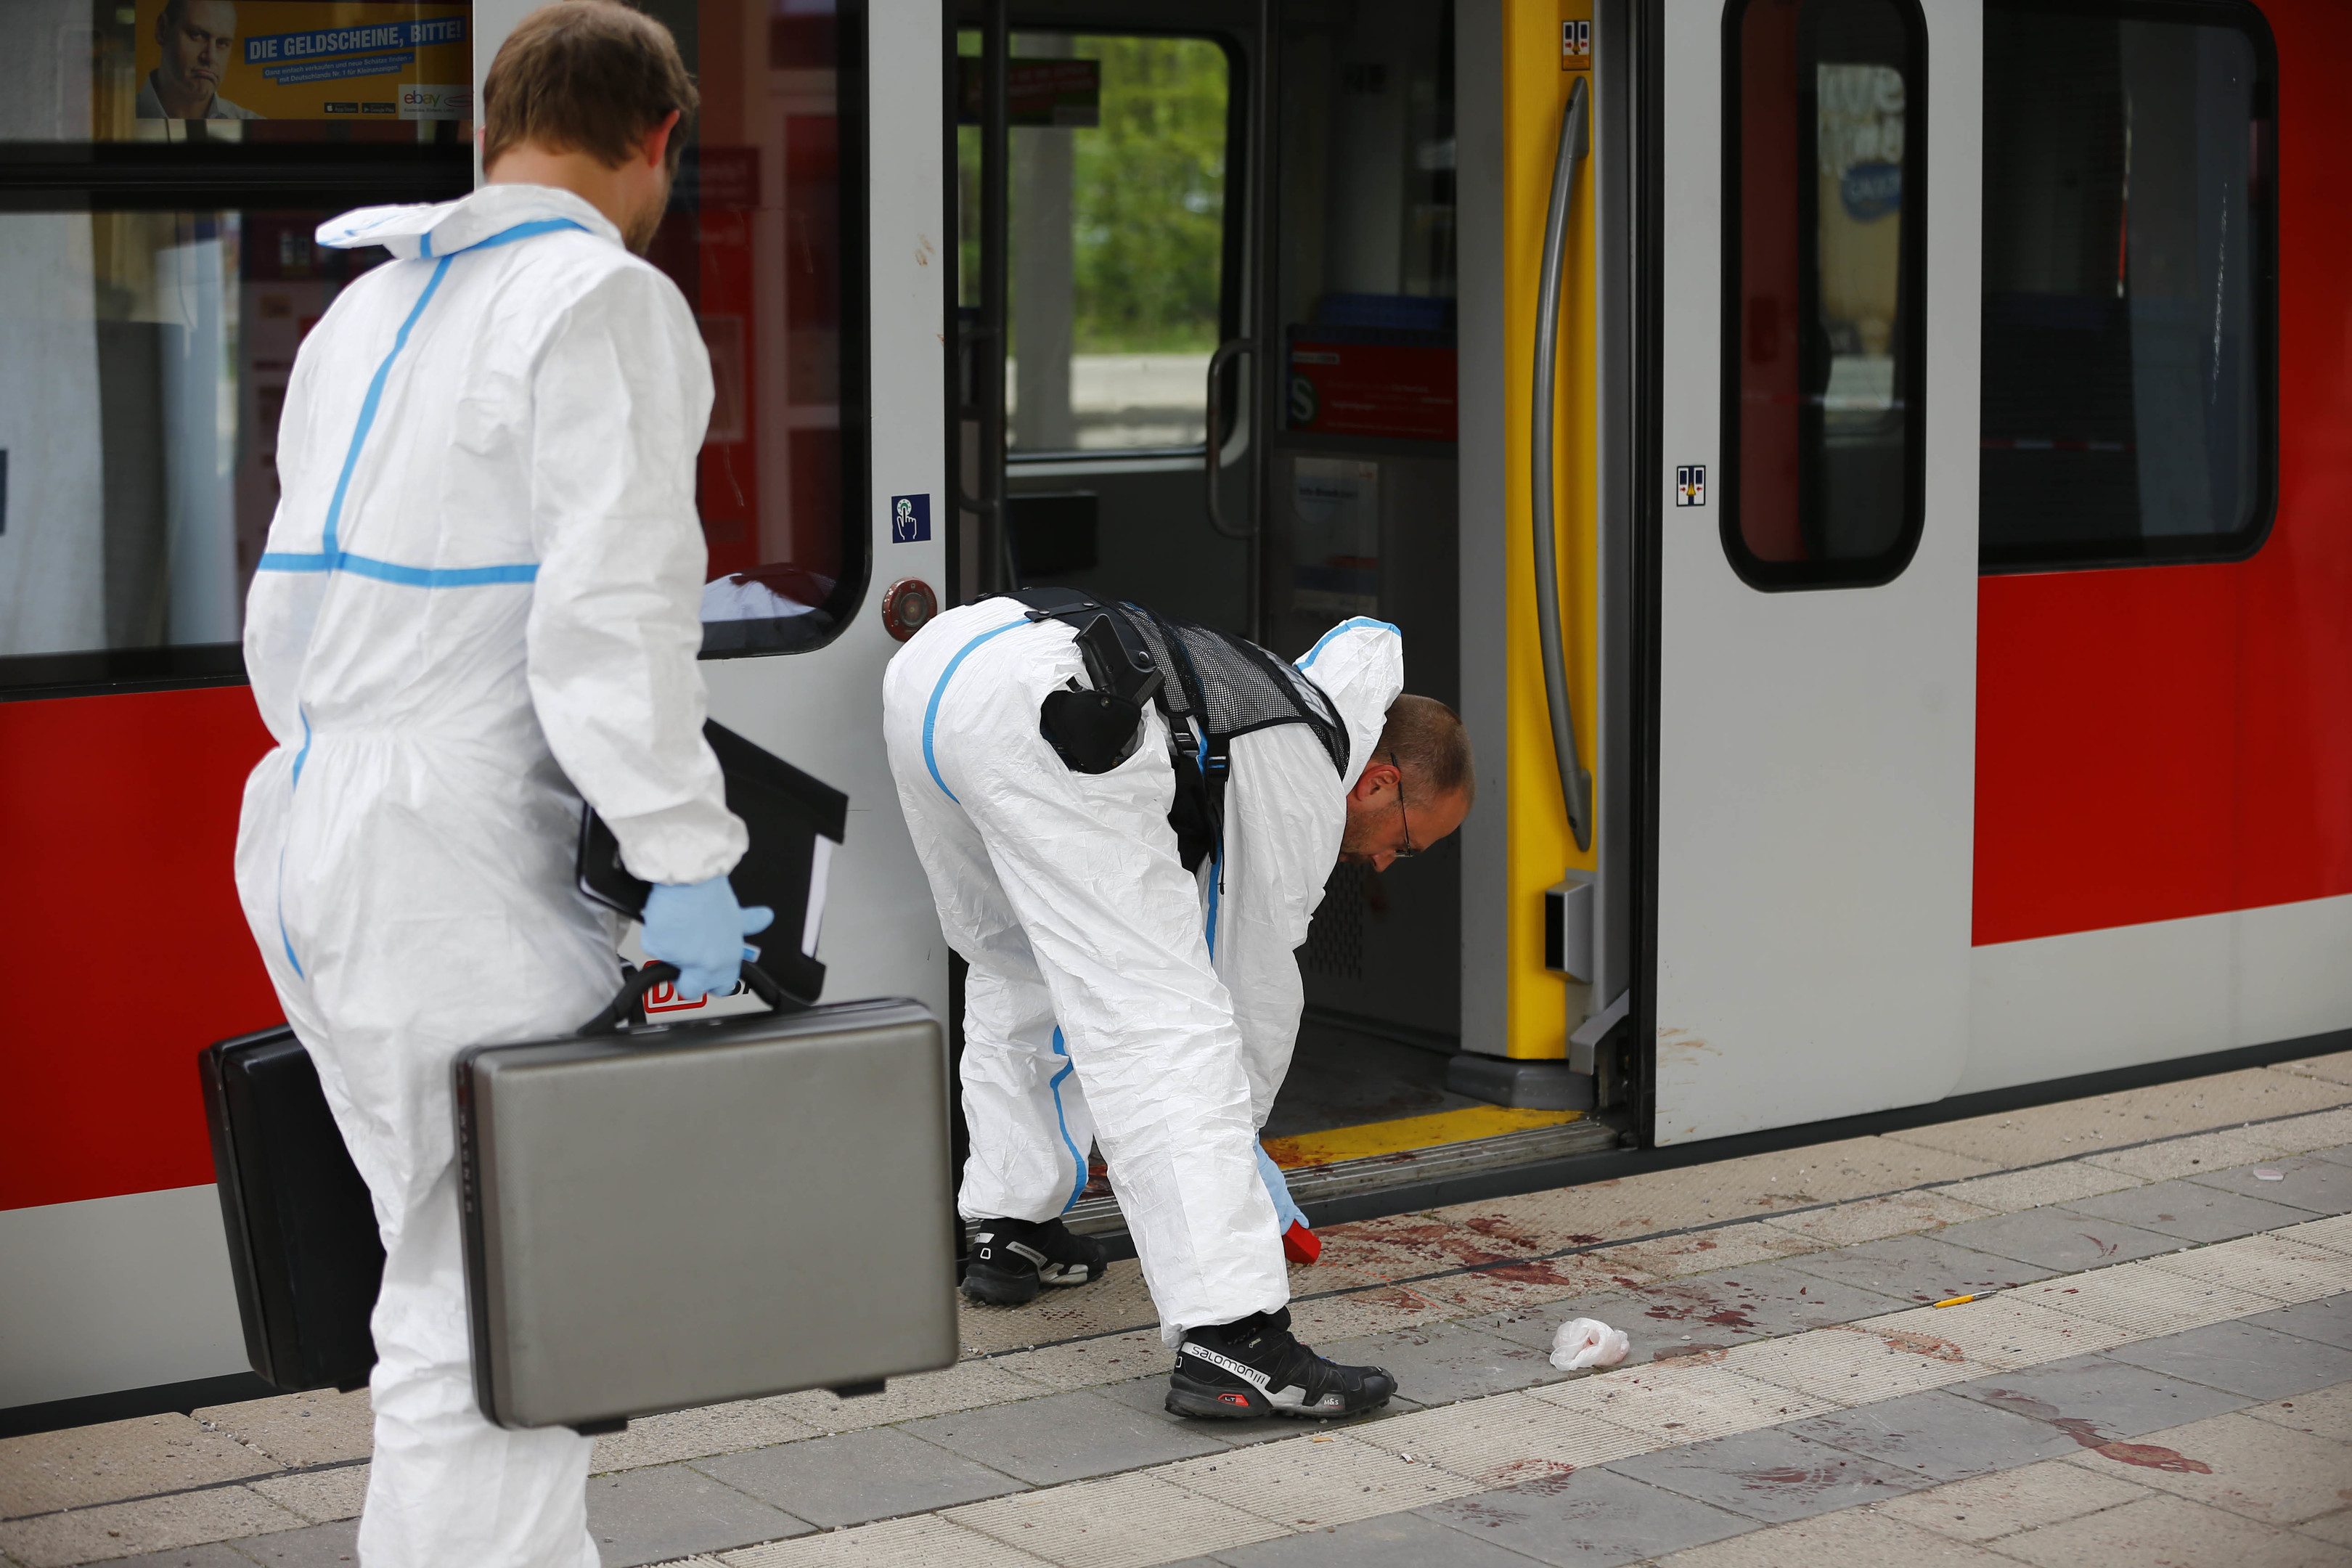 Police investigate the scene of a stabbing at a station in Grafing near Munich in Germany.